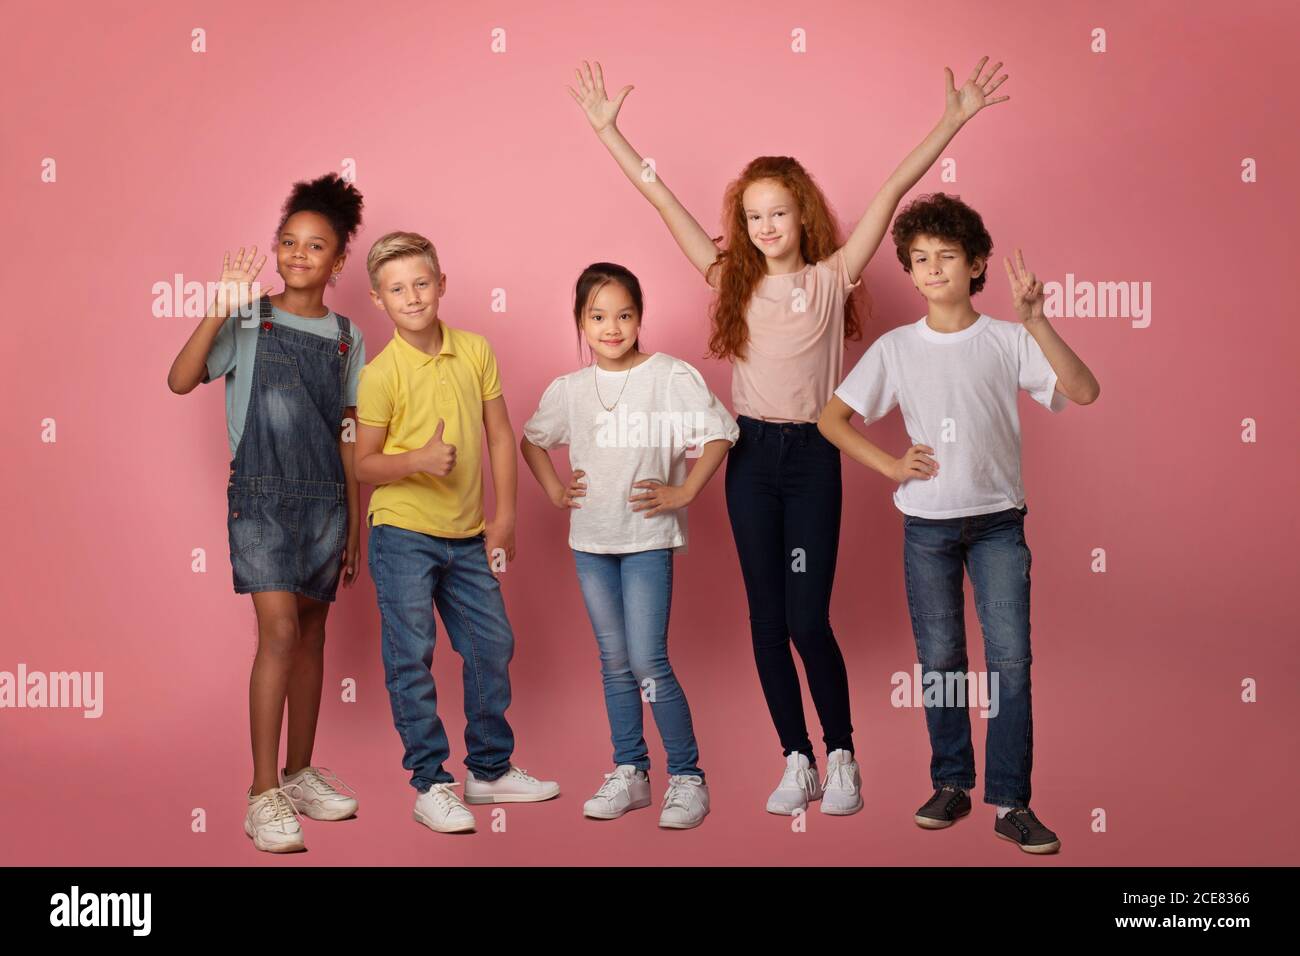 Full length portrait of happy diverse schoolkids making different gestures on pink background Stock Photo